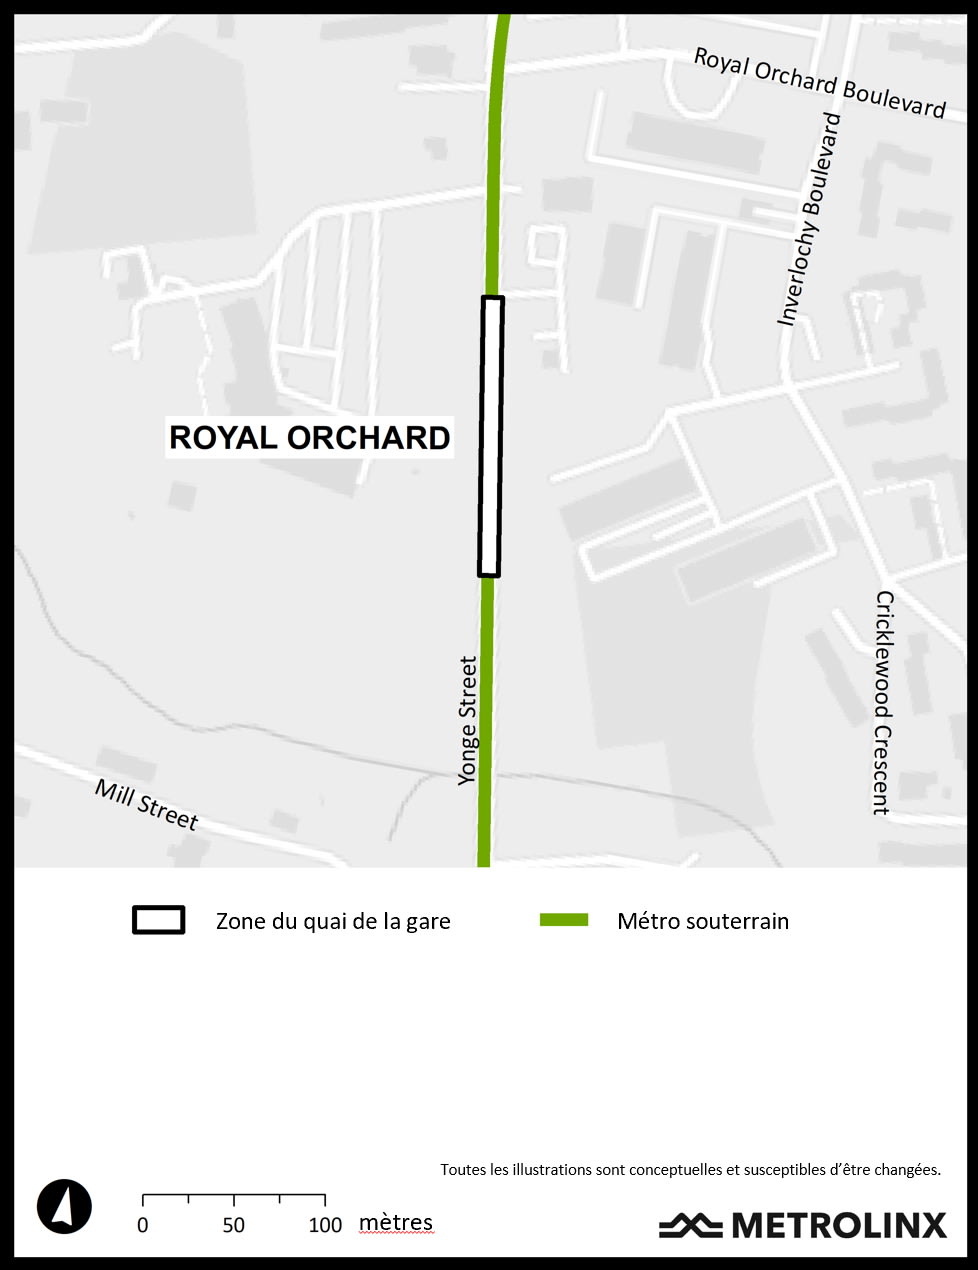 royal orchard station area map french